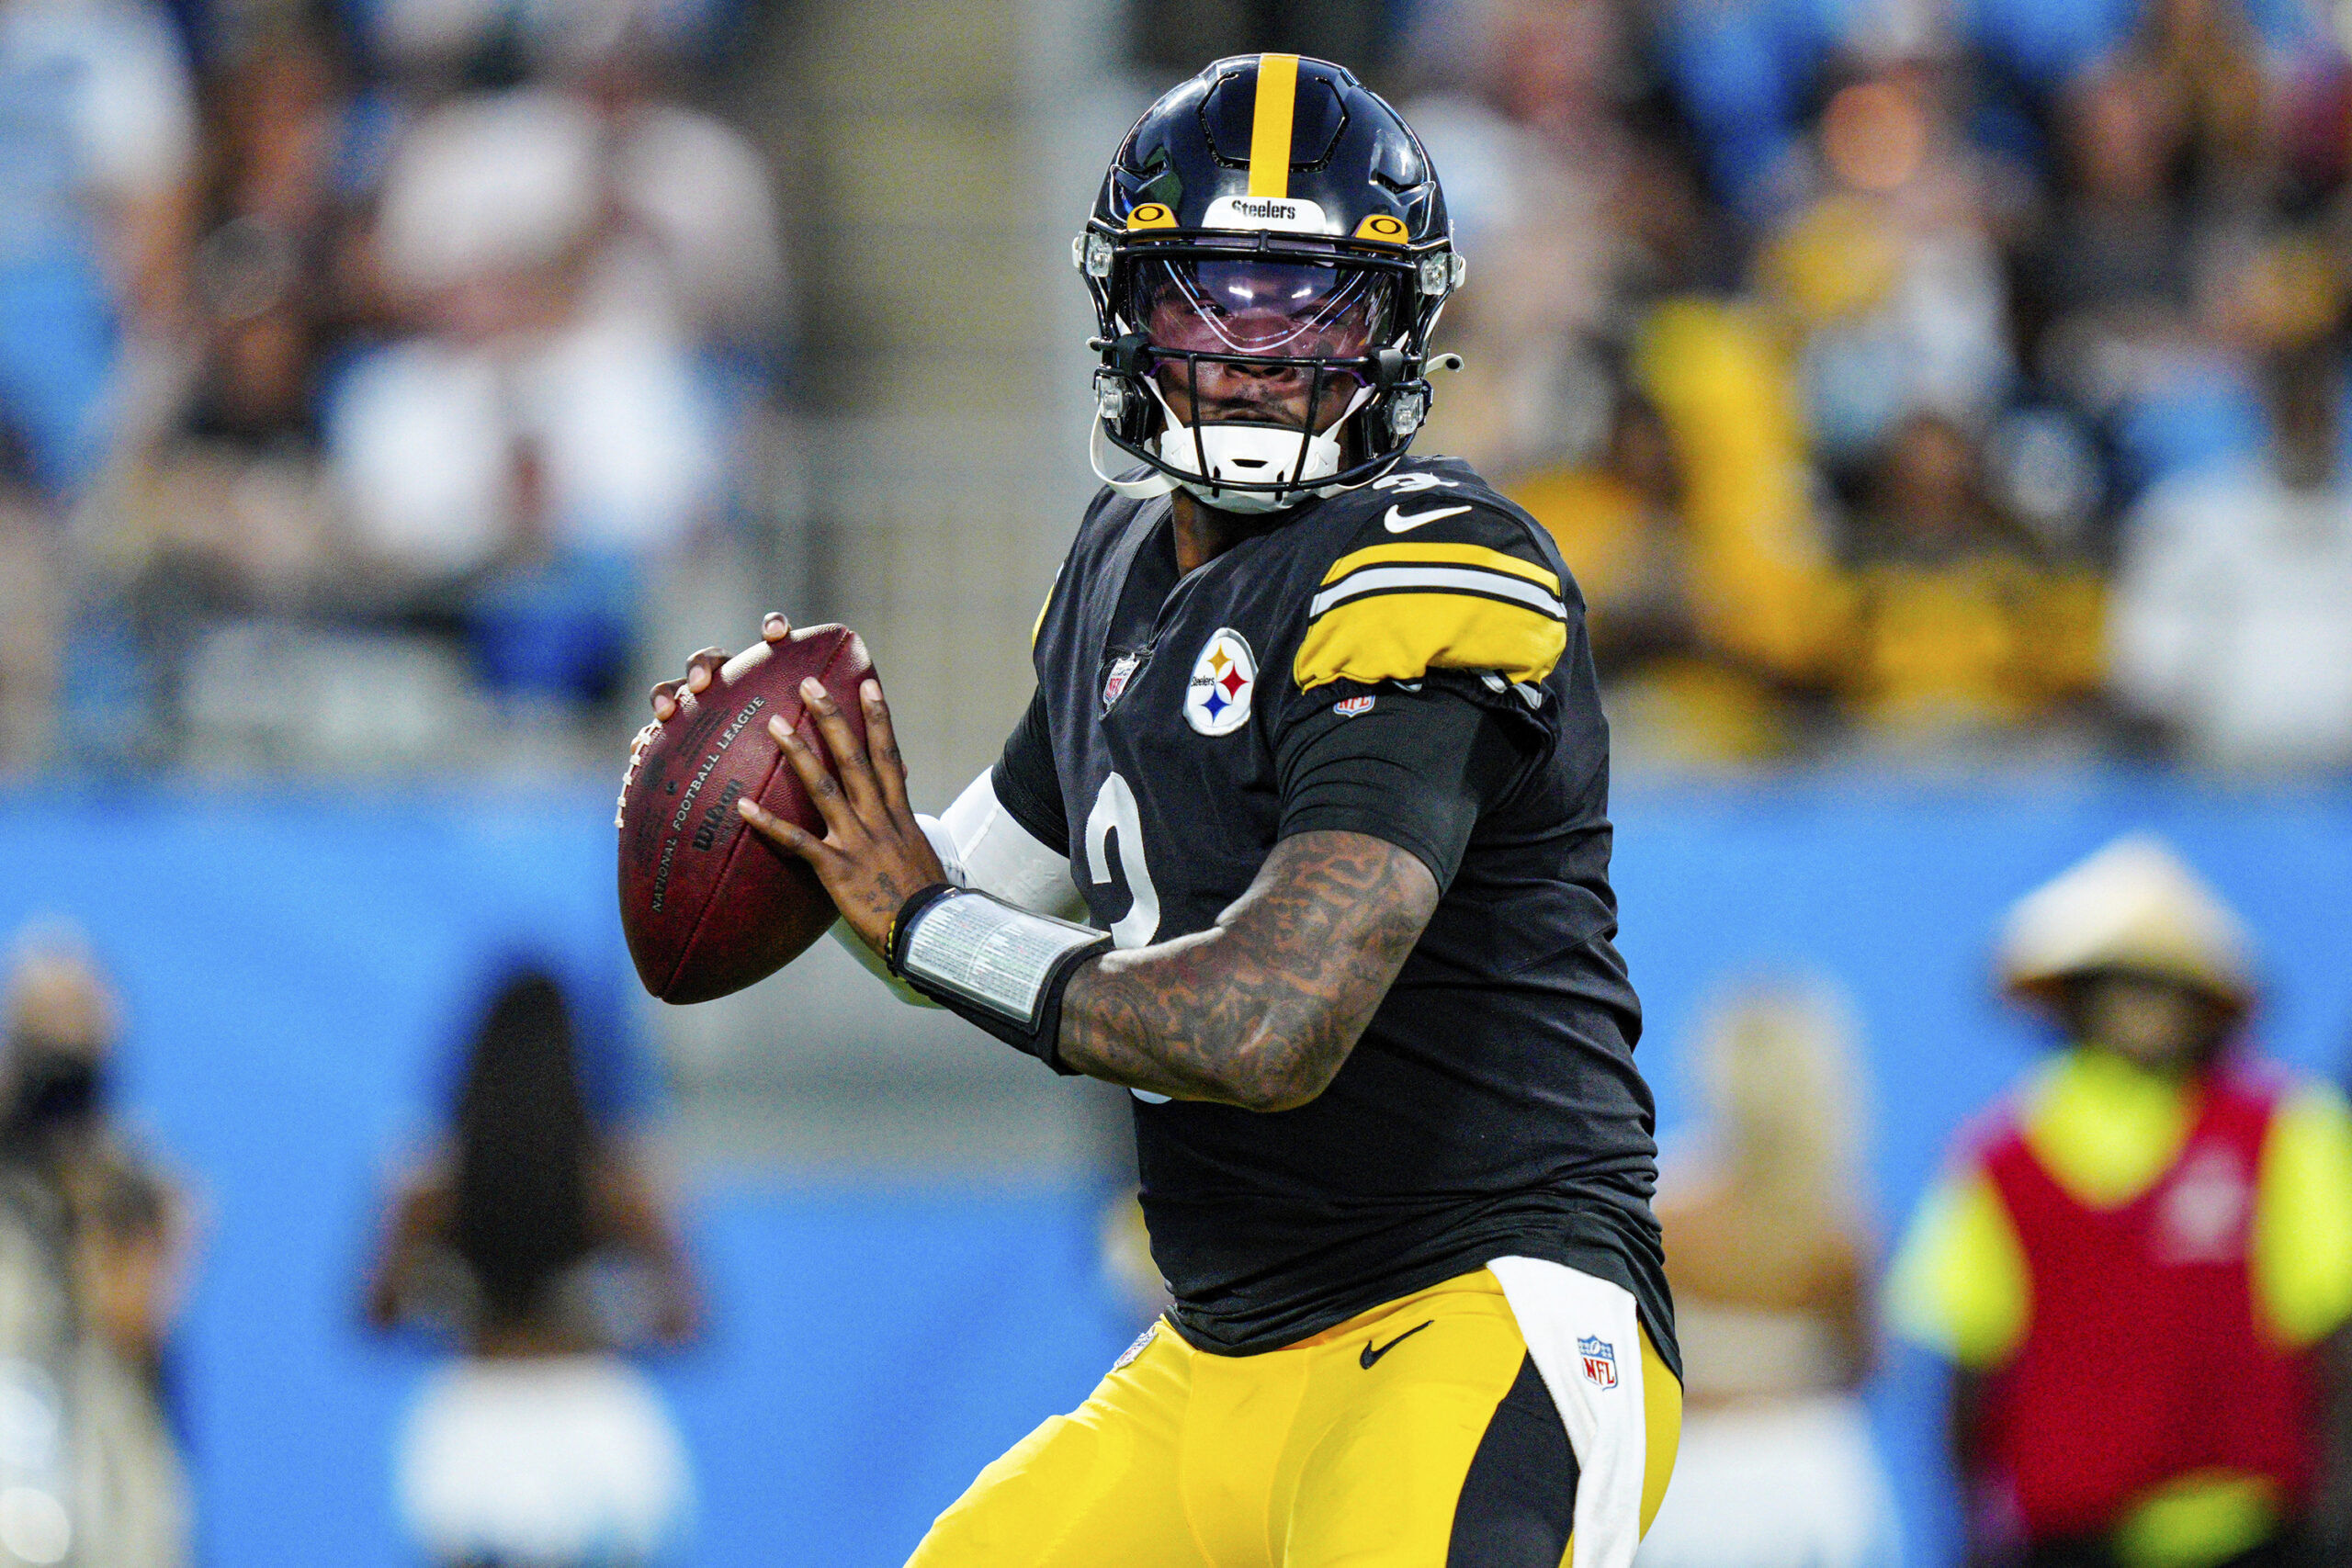 FILE - Pittsburgh Steelers quarterback Dwayne Haskins plays against the Carolina Panthers during the first half of a preseason NFL football game Friday, Aug. 27, 2021, in Charlotte, N.C. Haskins was killed in an auto accident Saturday, April 9, 2022, in Florida. Haskins' death was confirmed by the Steelers. (AP Photo/Jacob Kupferman, File)